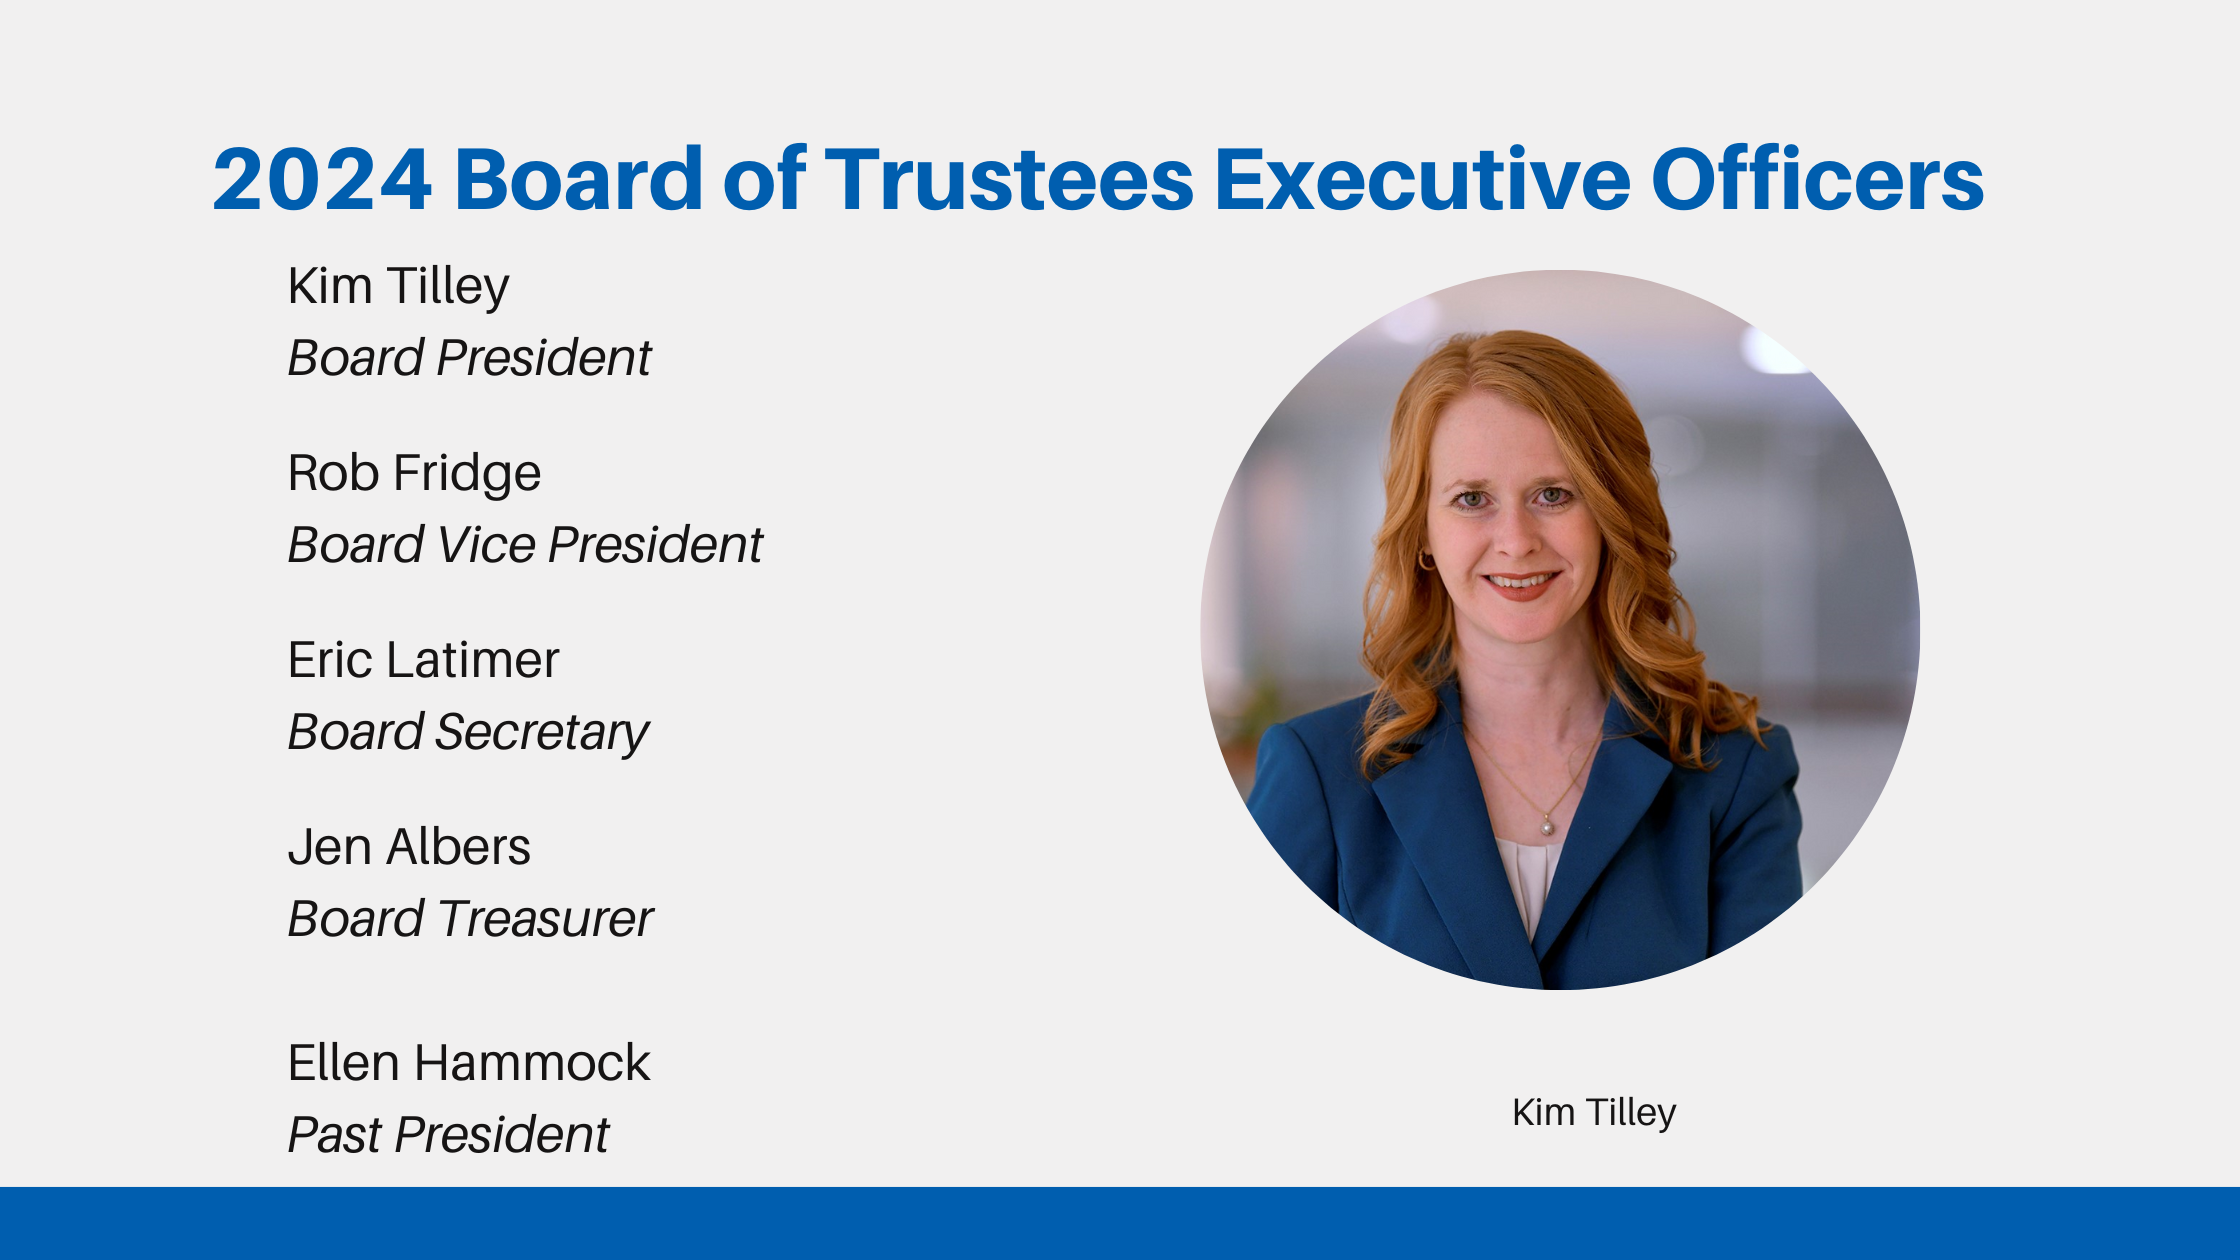 The Kitchen Announces 2024 Board of Trustees Executive Officers